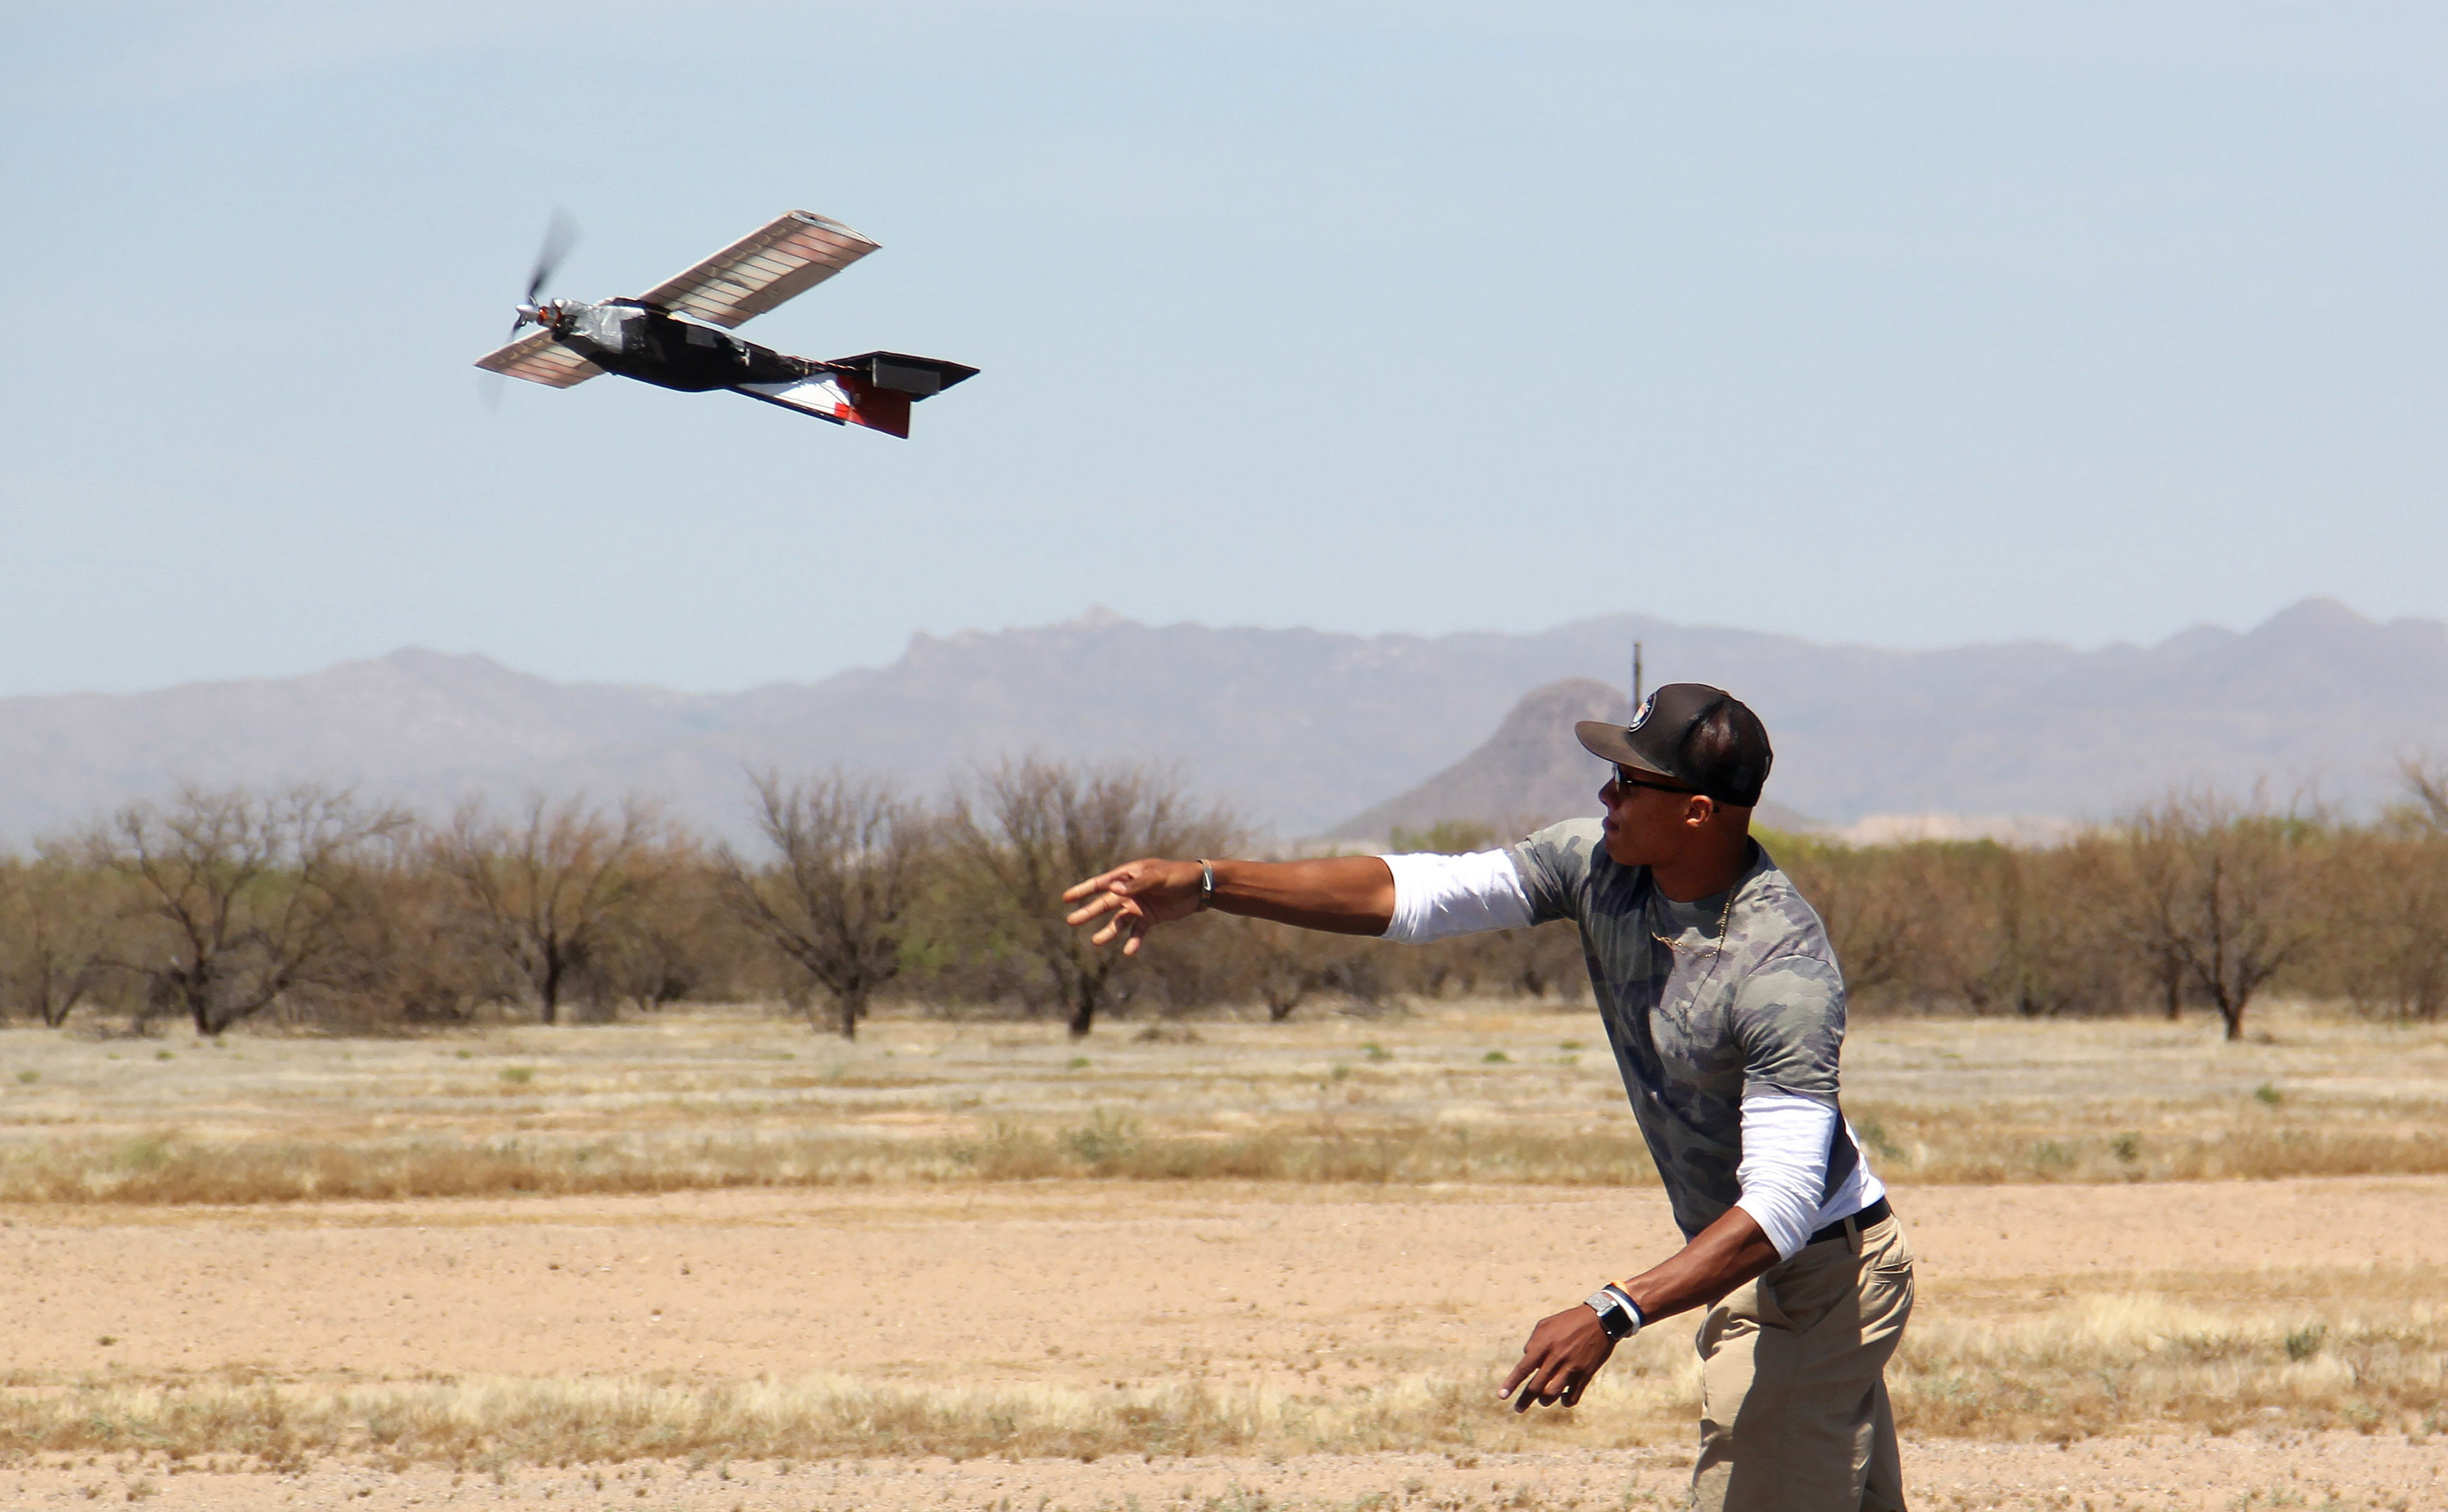 Former University of Tennessee quarterback Joshua Dobbs throws a model aircraft in the Design/Build/Fly American Institute of Aeronautics and Astronautics (AIAA) competition in Tucson, Arizona. Photo courtesy of AIAA.